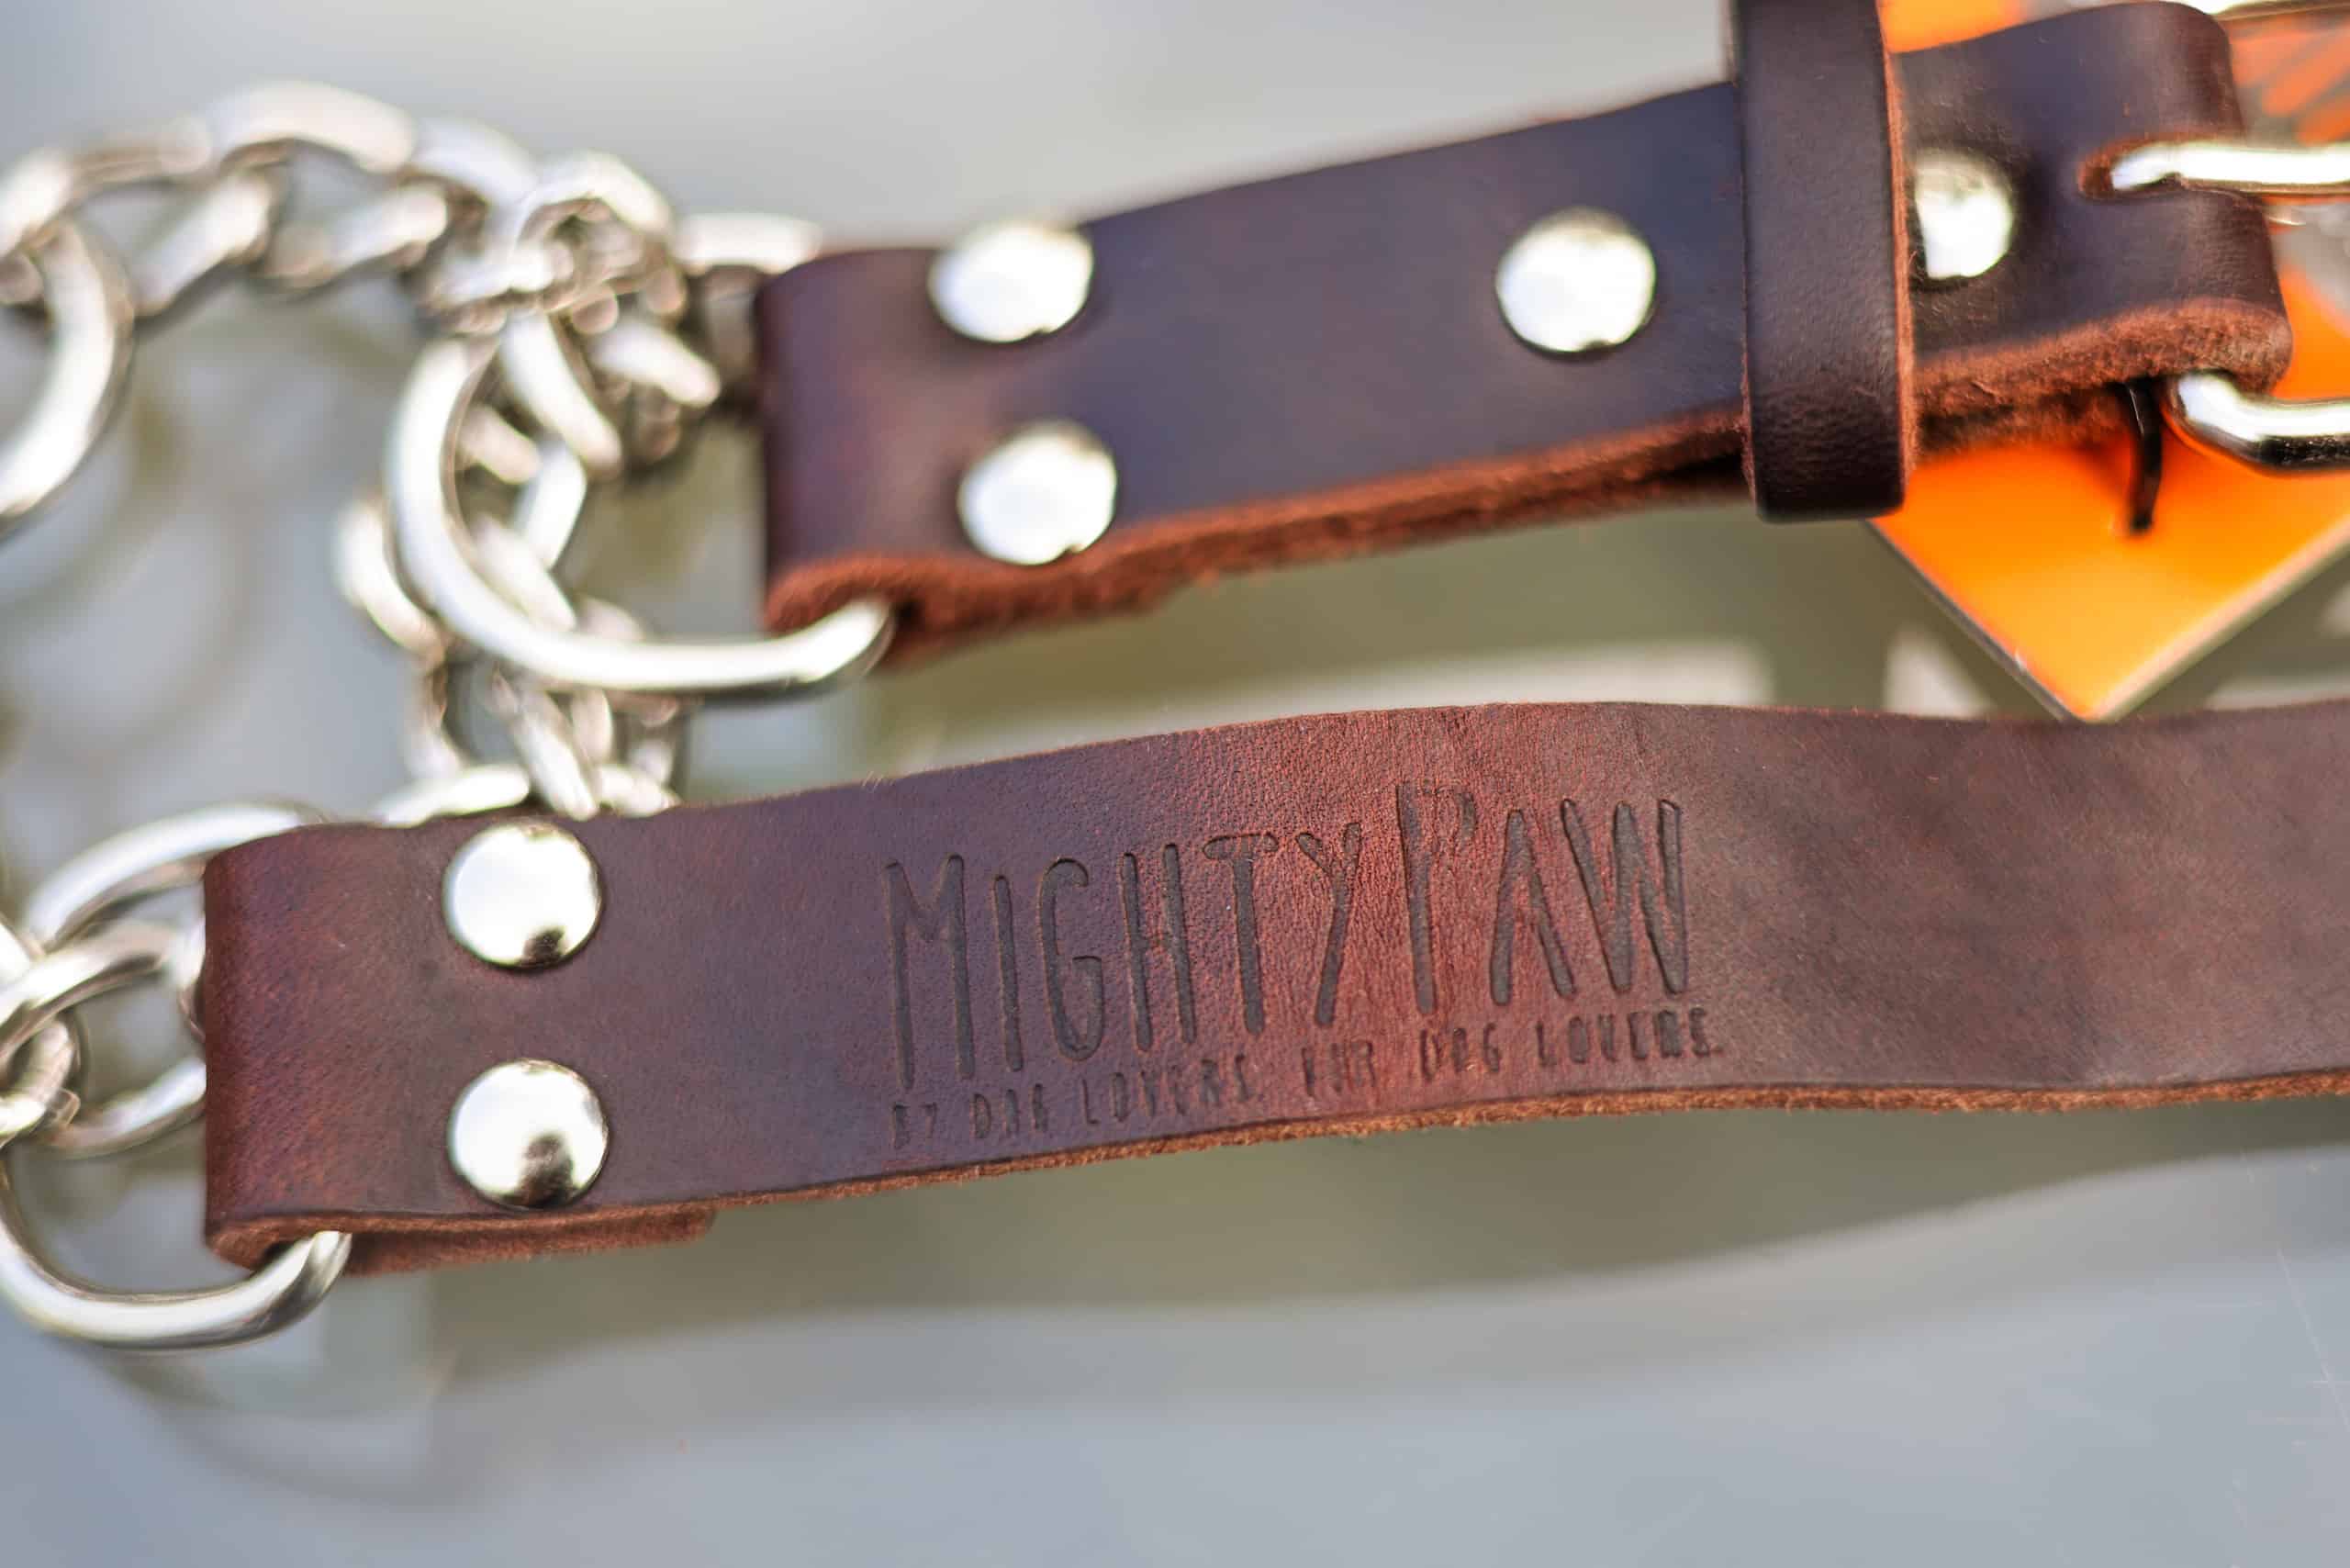 Close up of the Mighty Paw leather martingale training collar